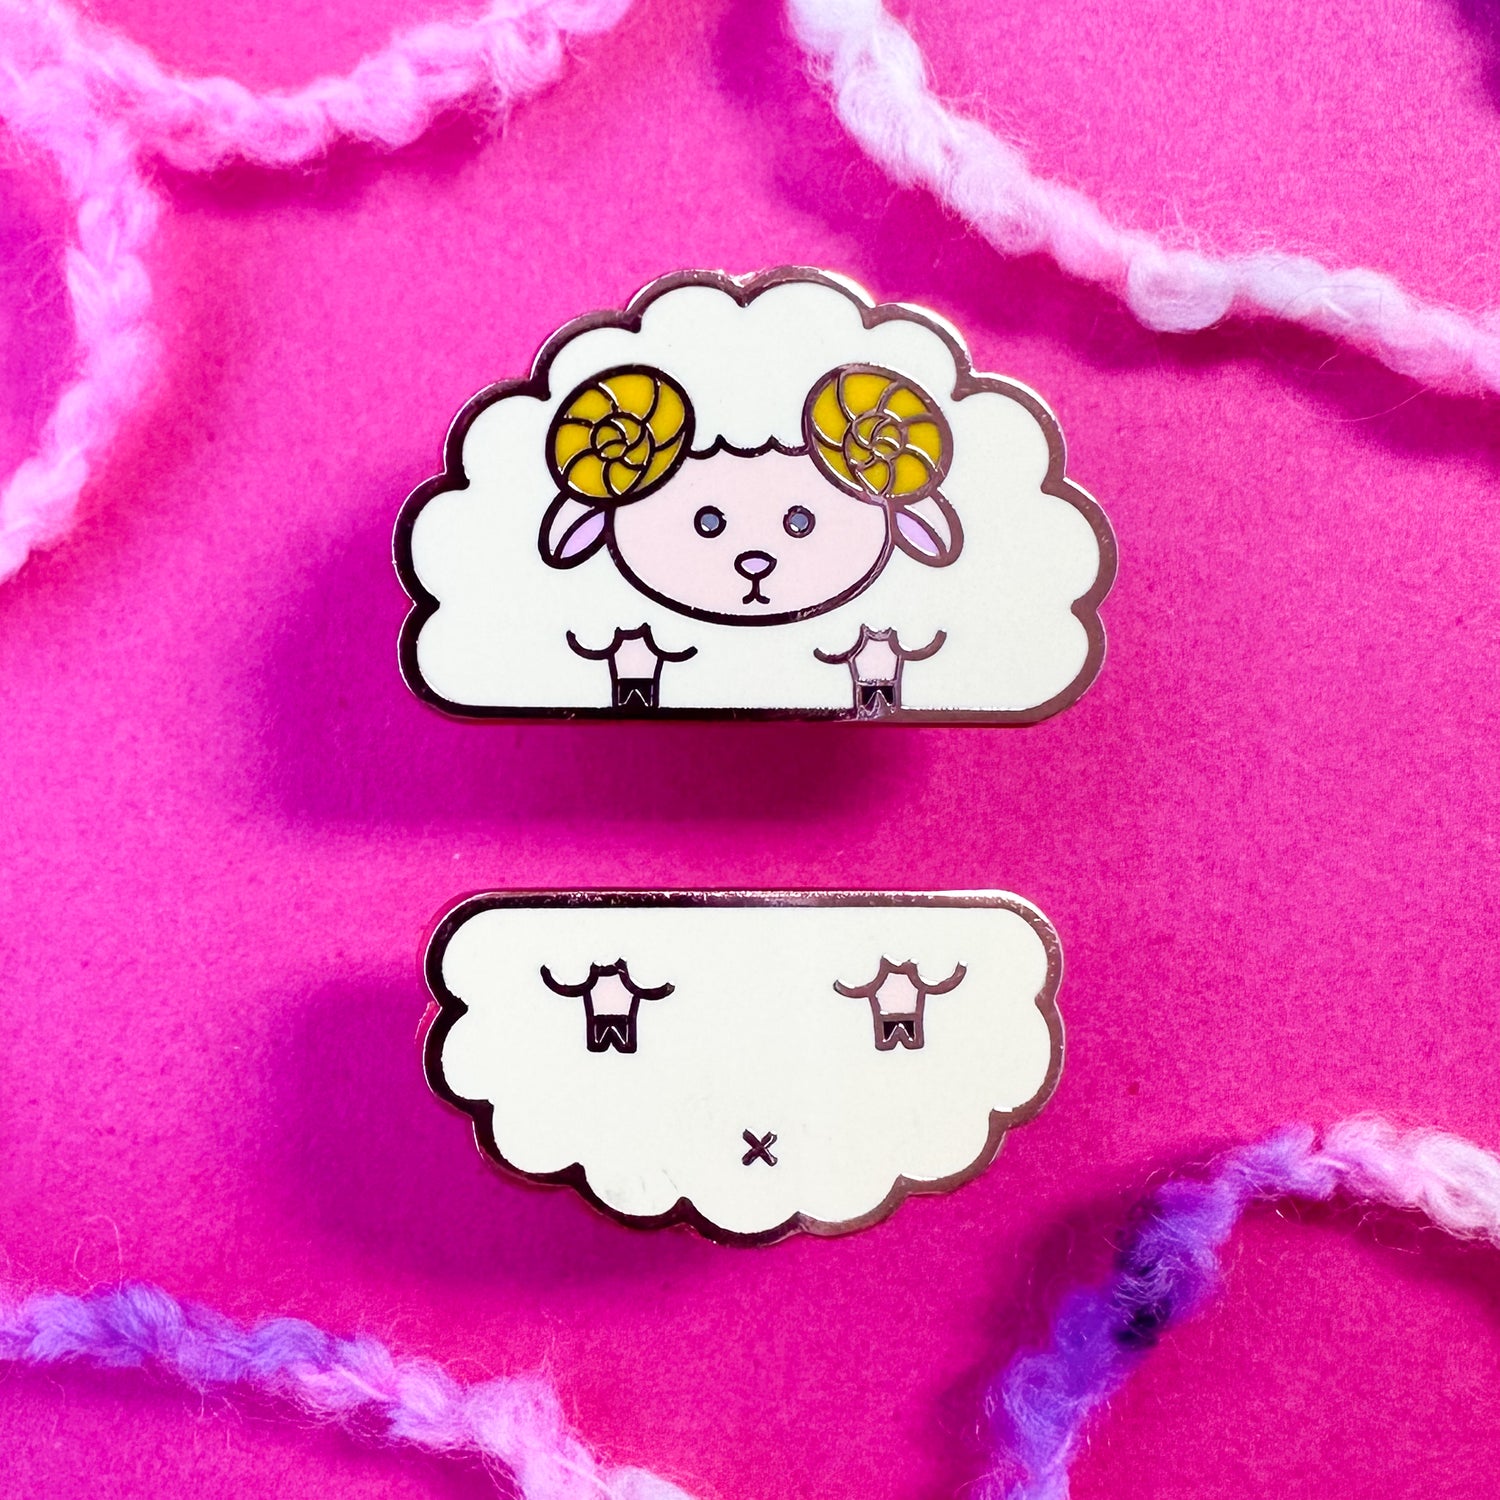 Two cute pins that come together to form a sheep. The pins are on a hot pink background with boucle yarn around it. 